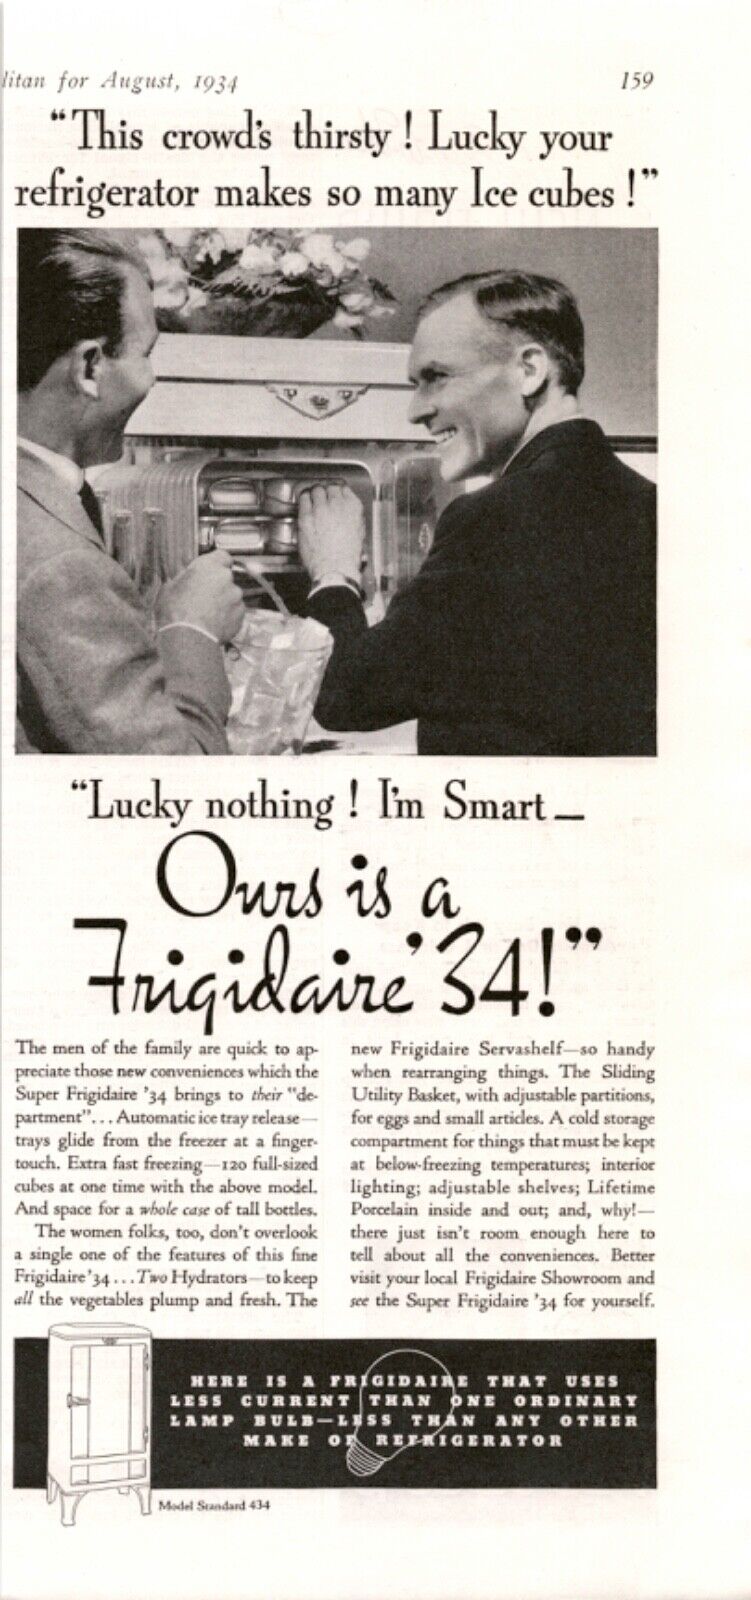 Frigidaire Ad: Vintage 1934 - Super Frigidaire '34 - Automatic Ice Tray Release